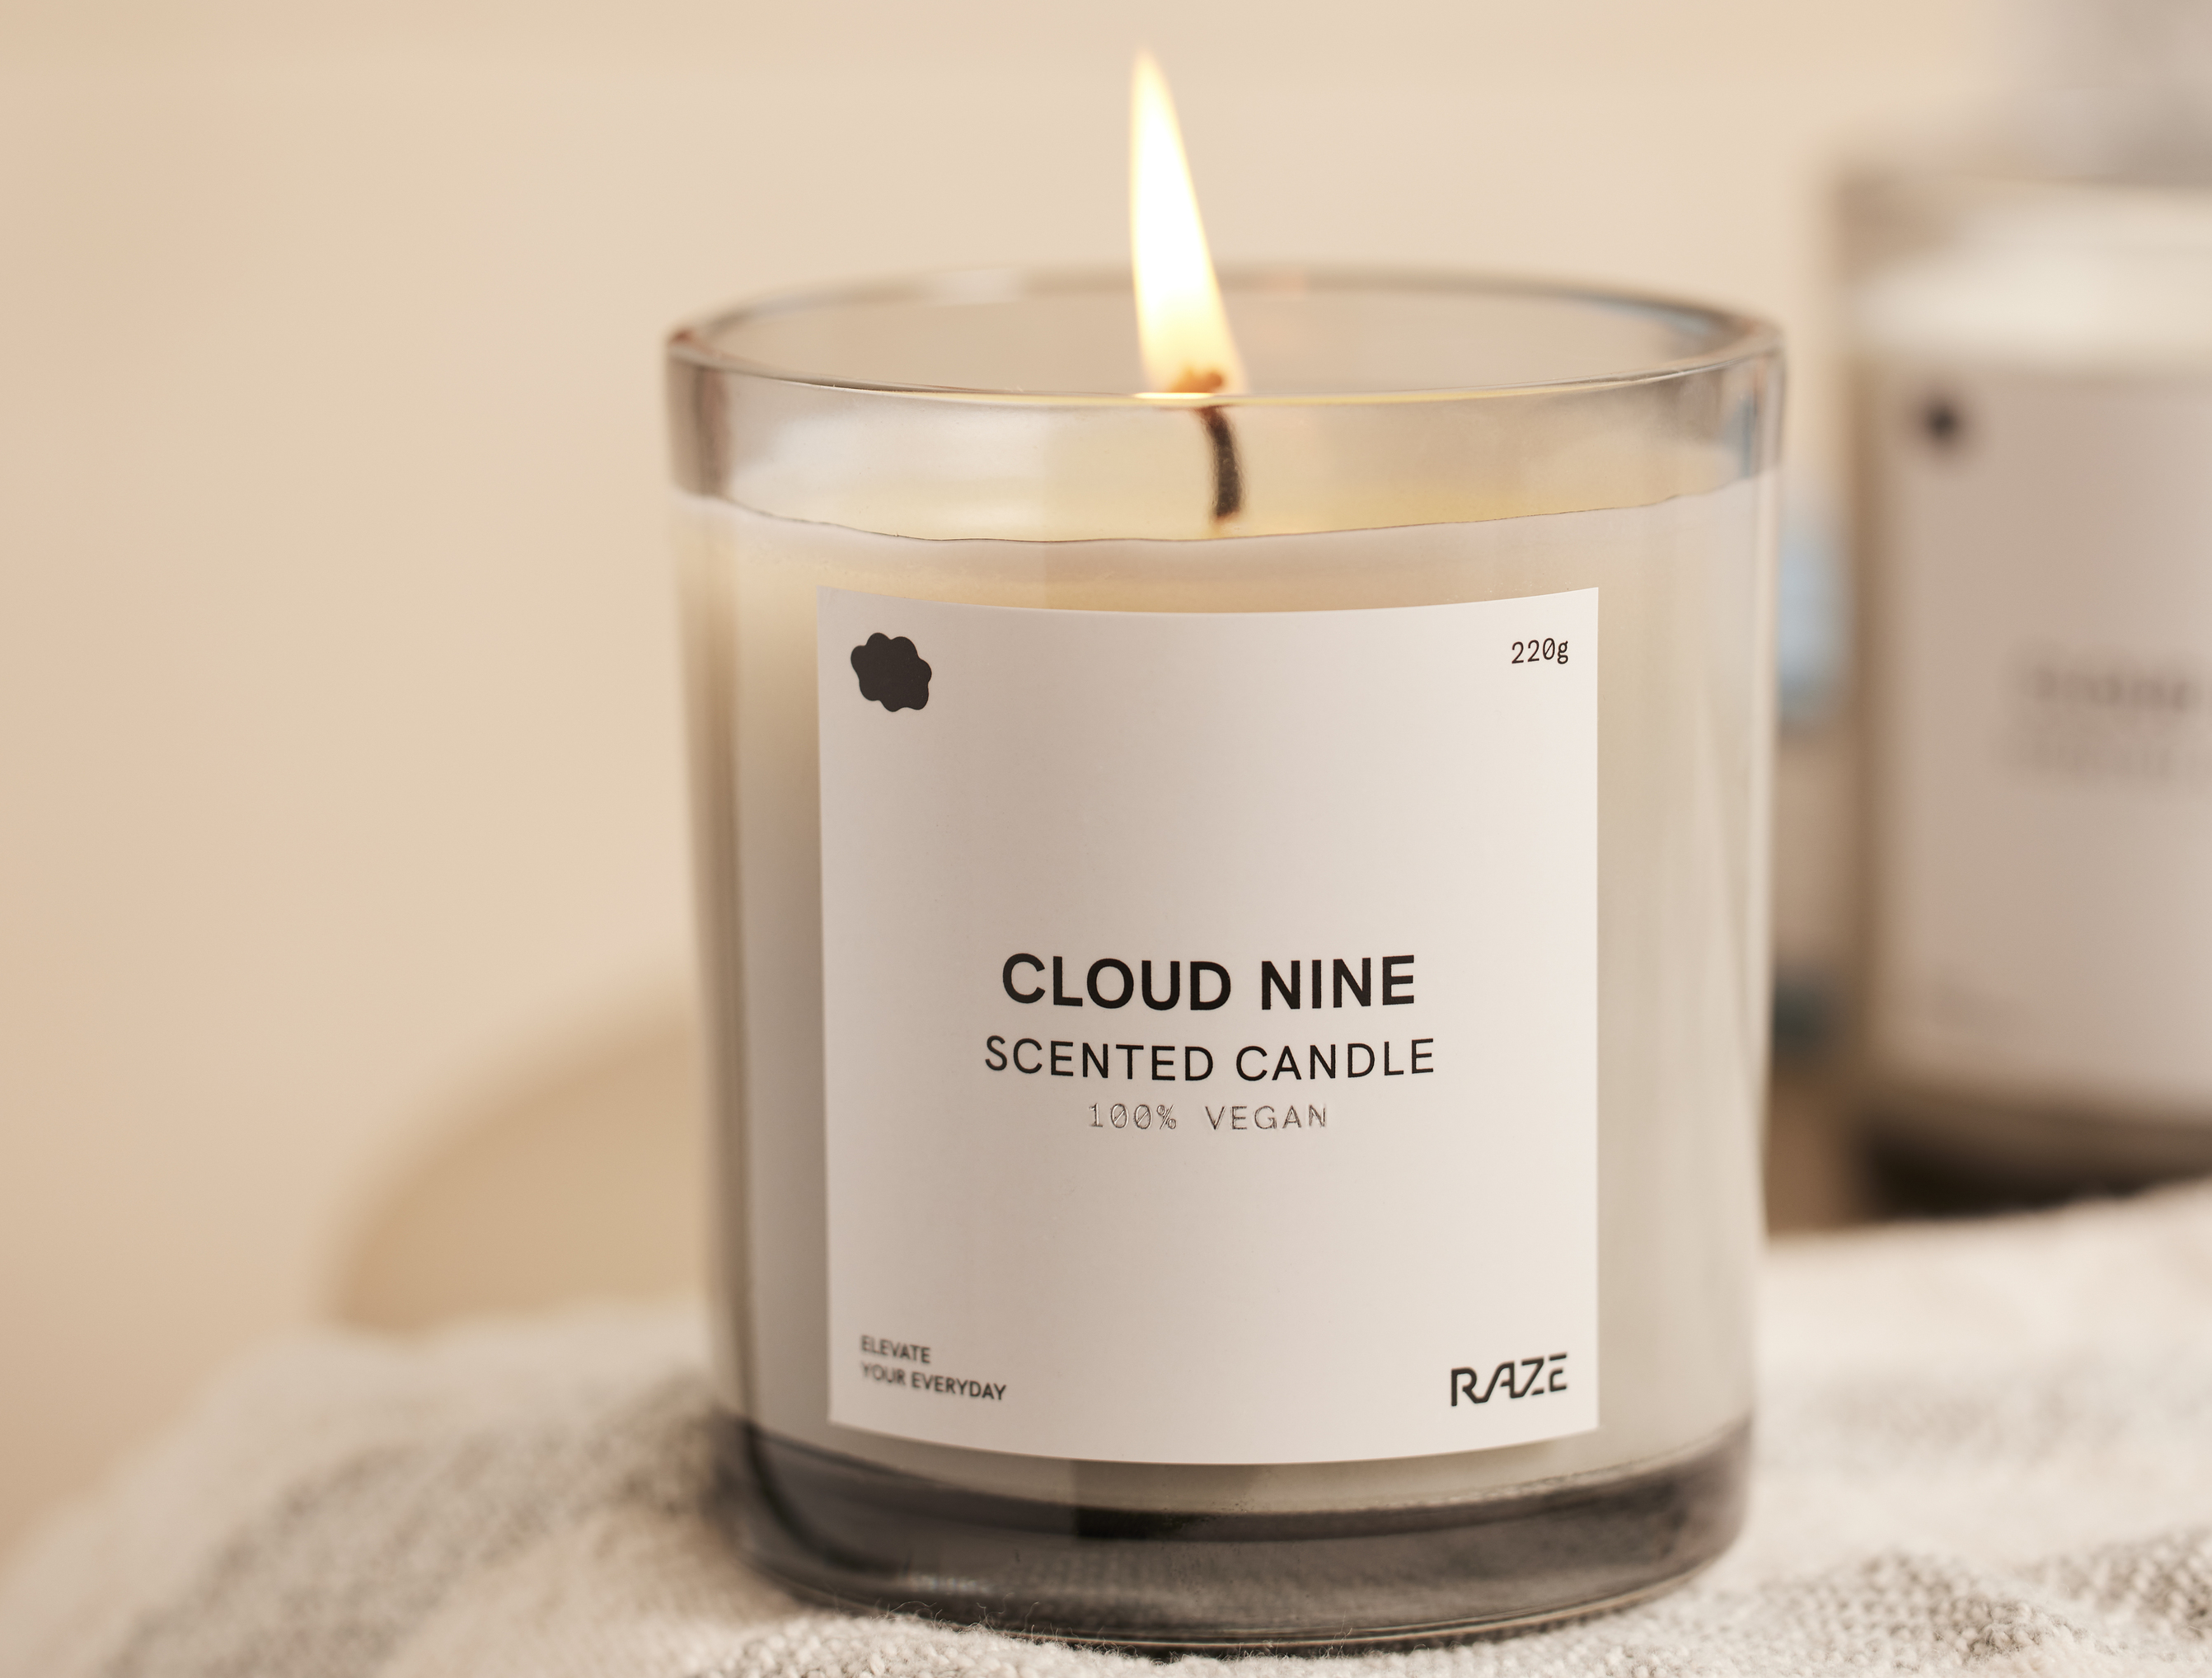 Cloud Nine Scented Candle 220g